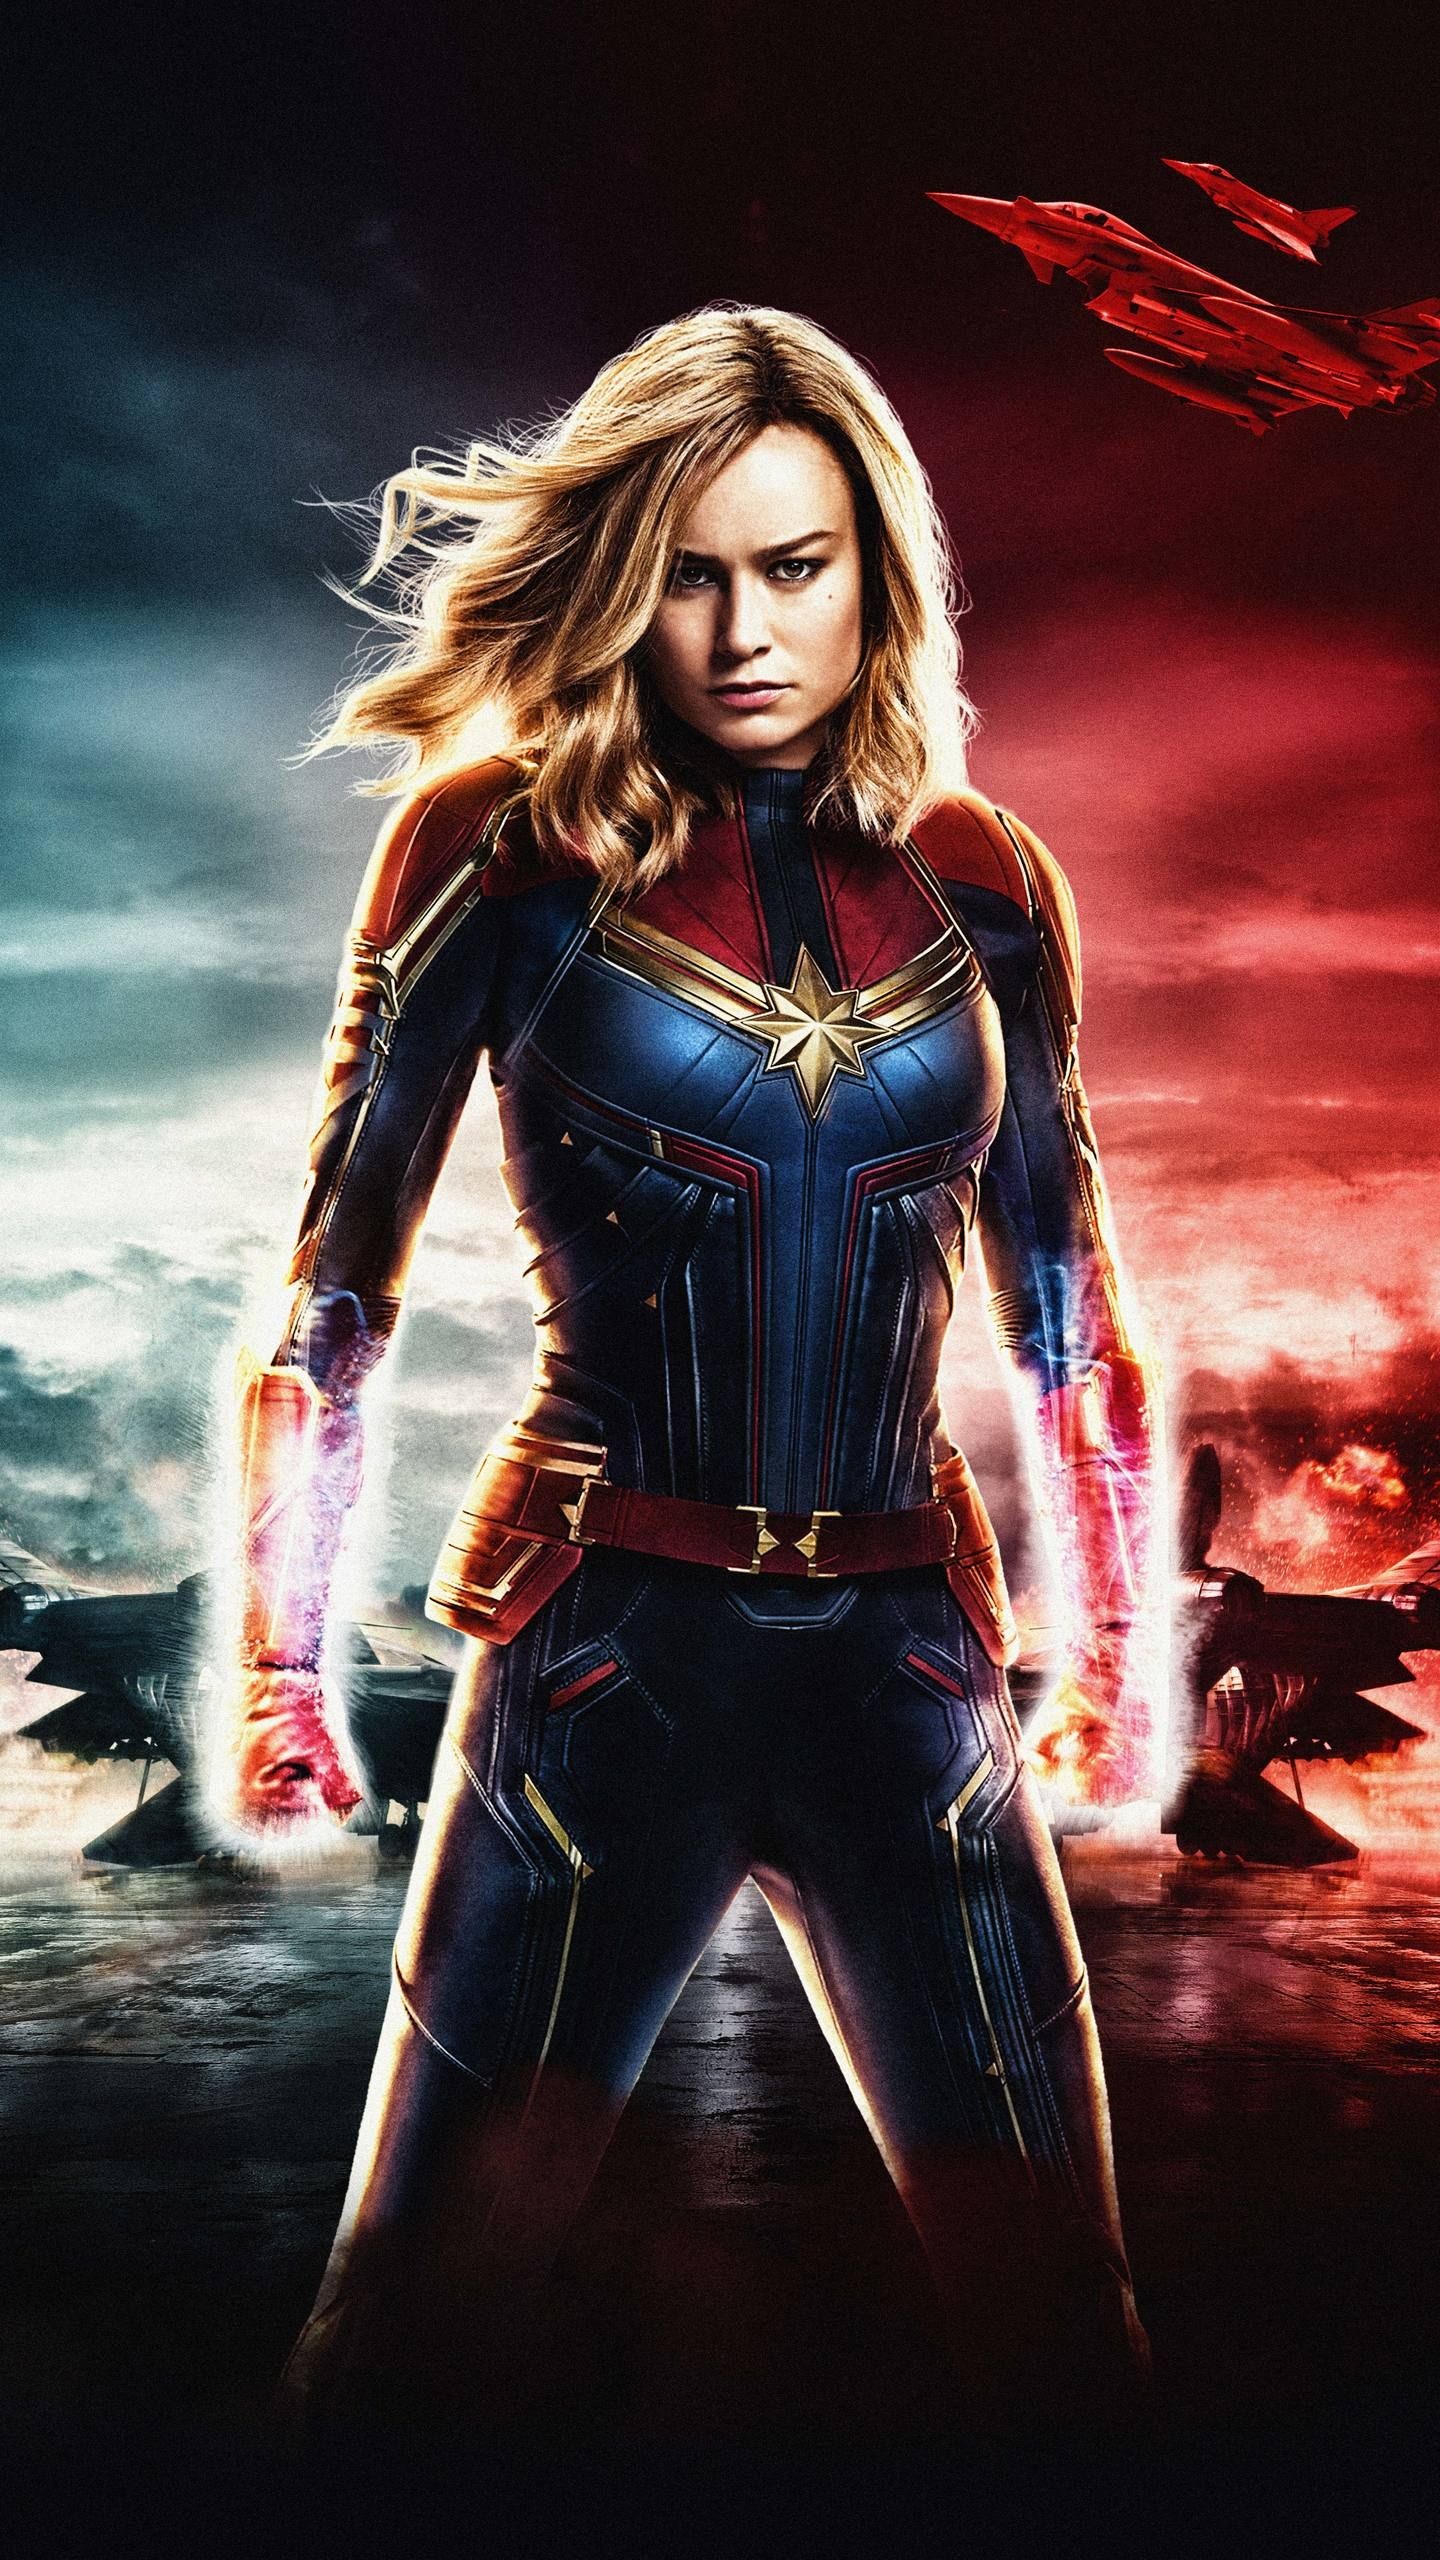 1440x2560, 10 Reasons To Watch Captain Marvel - Captain Marvel Wallpaper Iphone - HD Wallpaper 